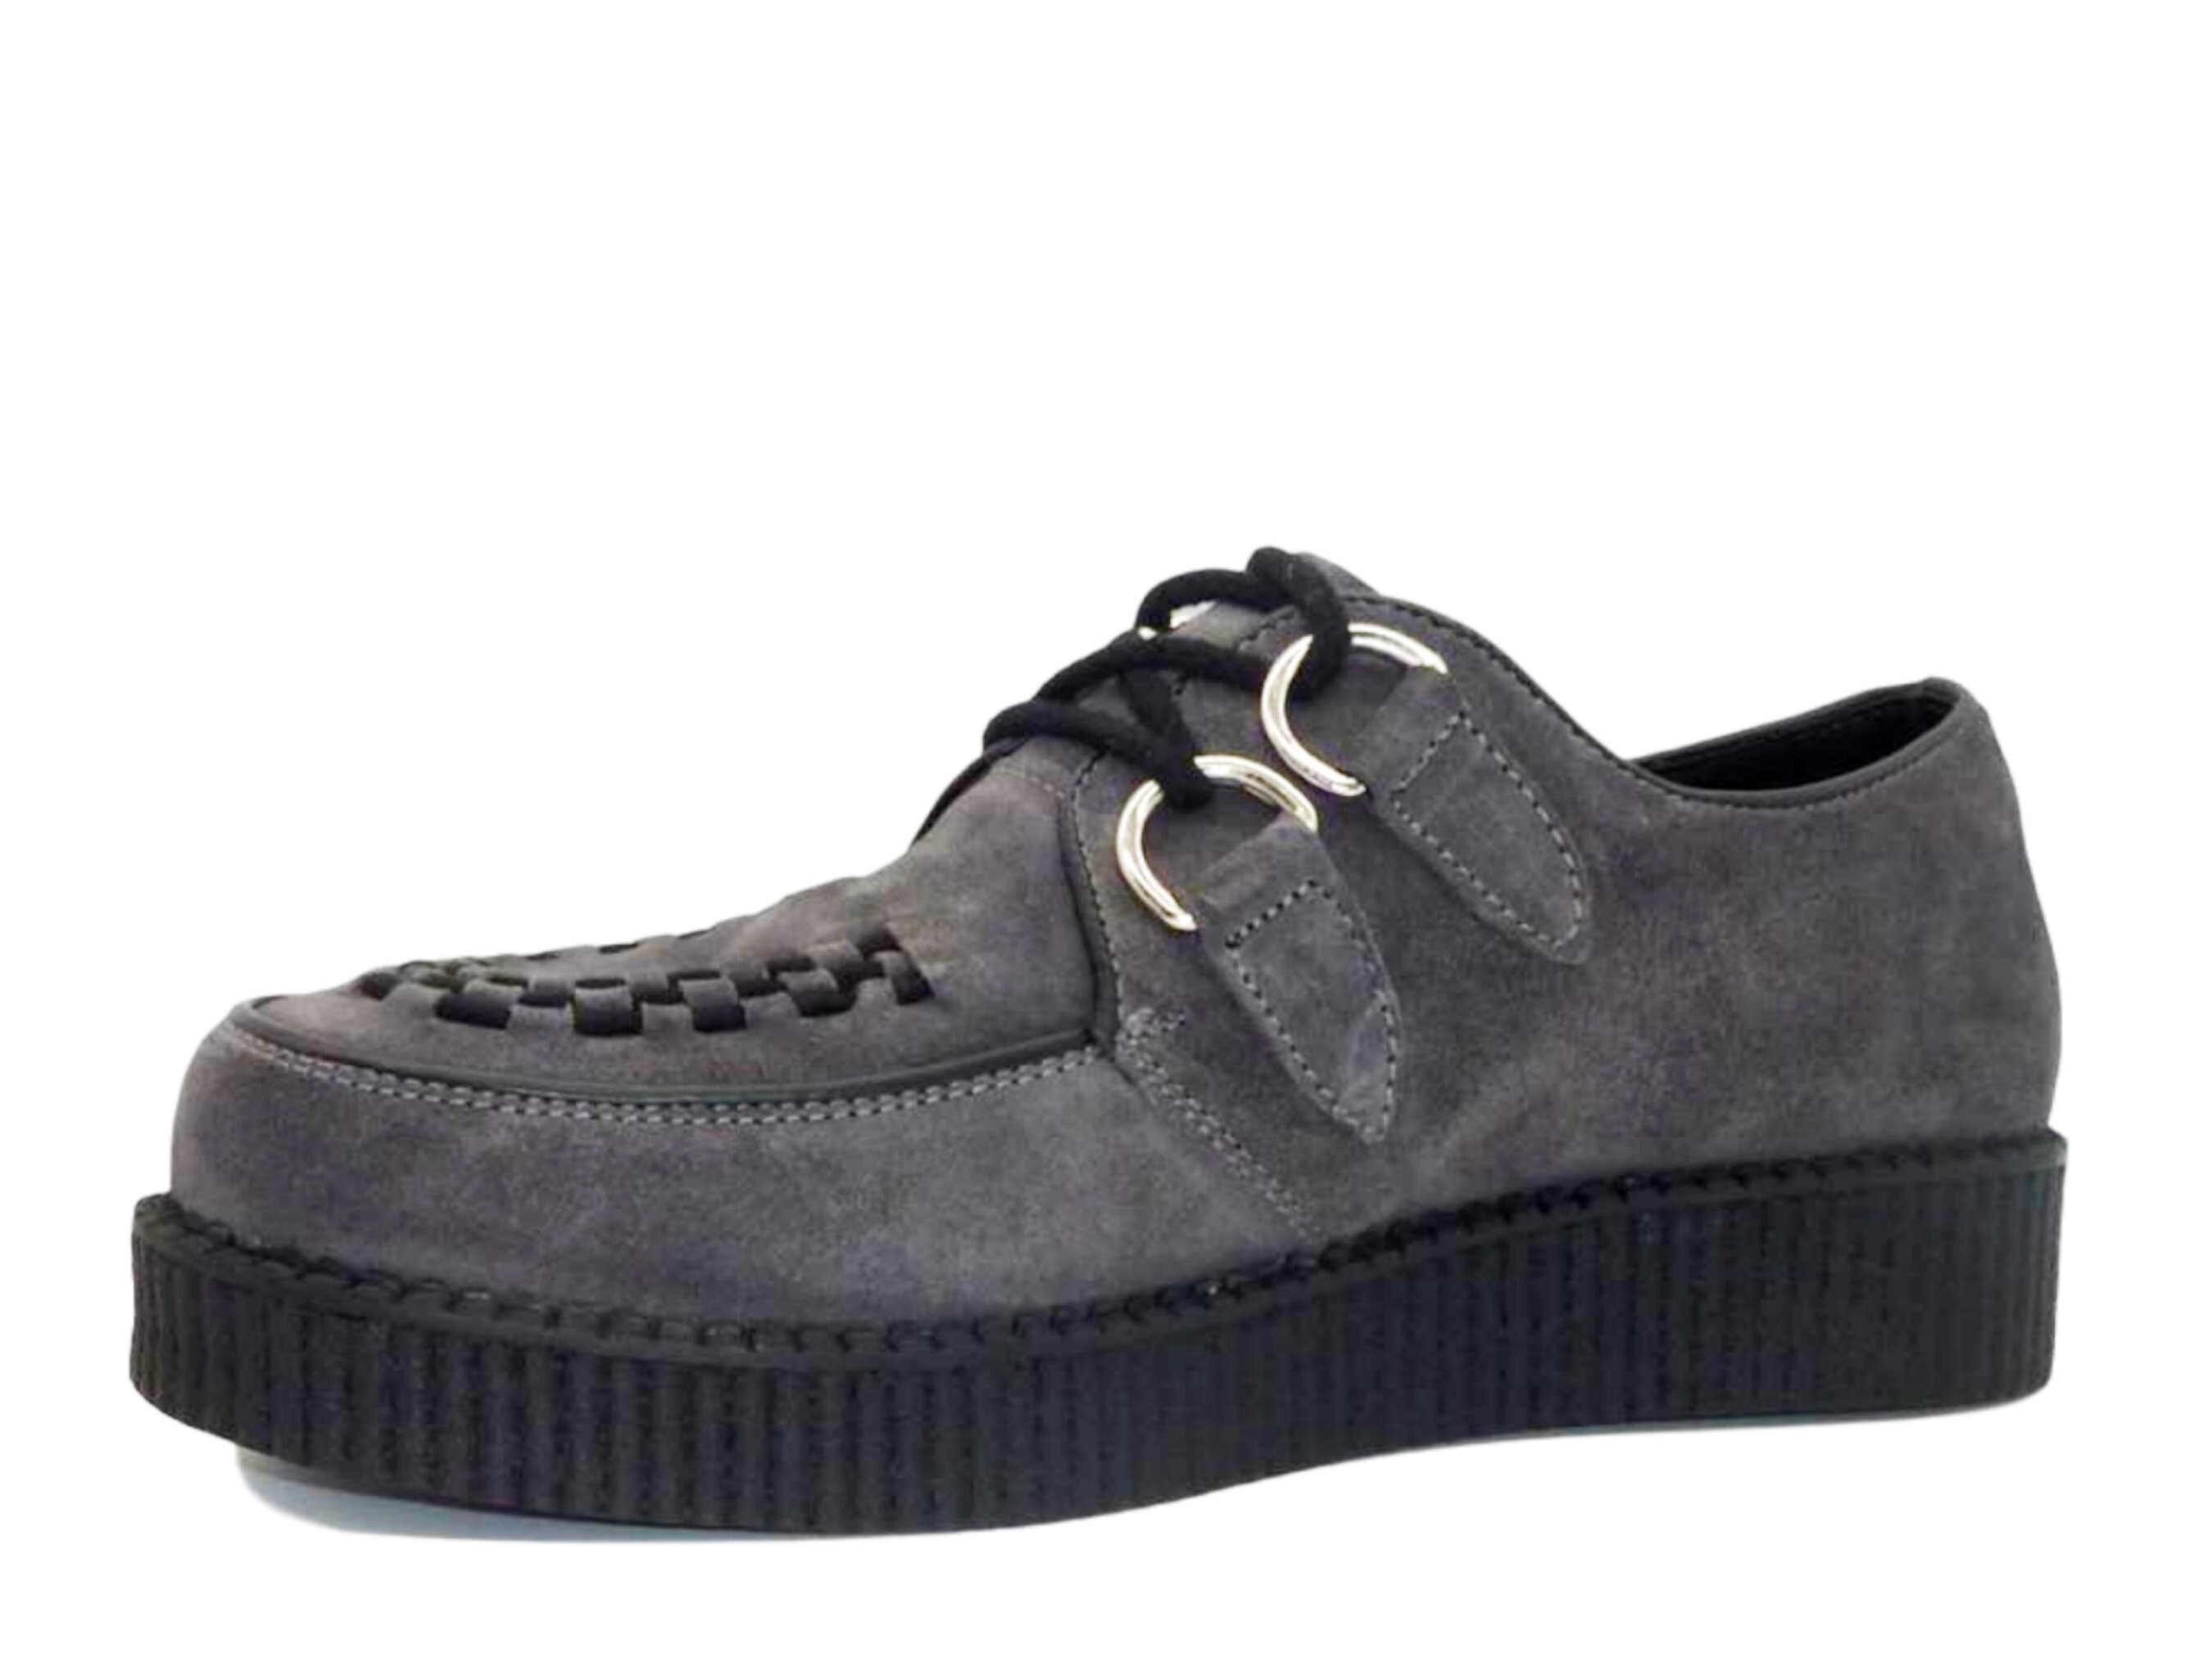 Chunky Sole Retro Suede Creepers Grey Rockabilly Dancing Shoes - Etsy UK